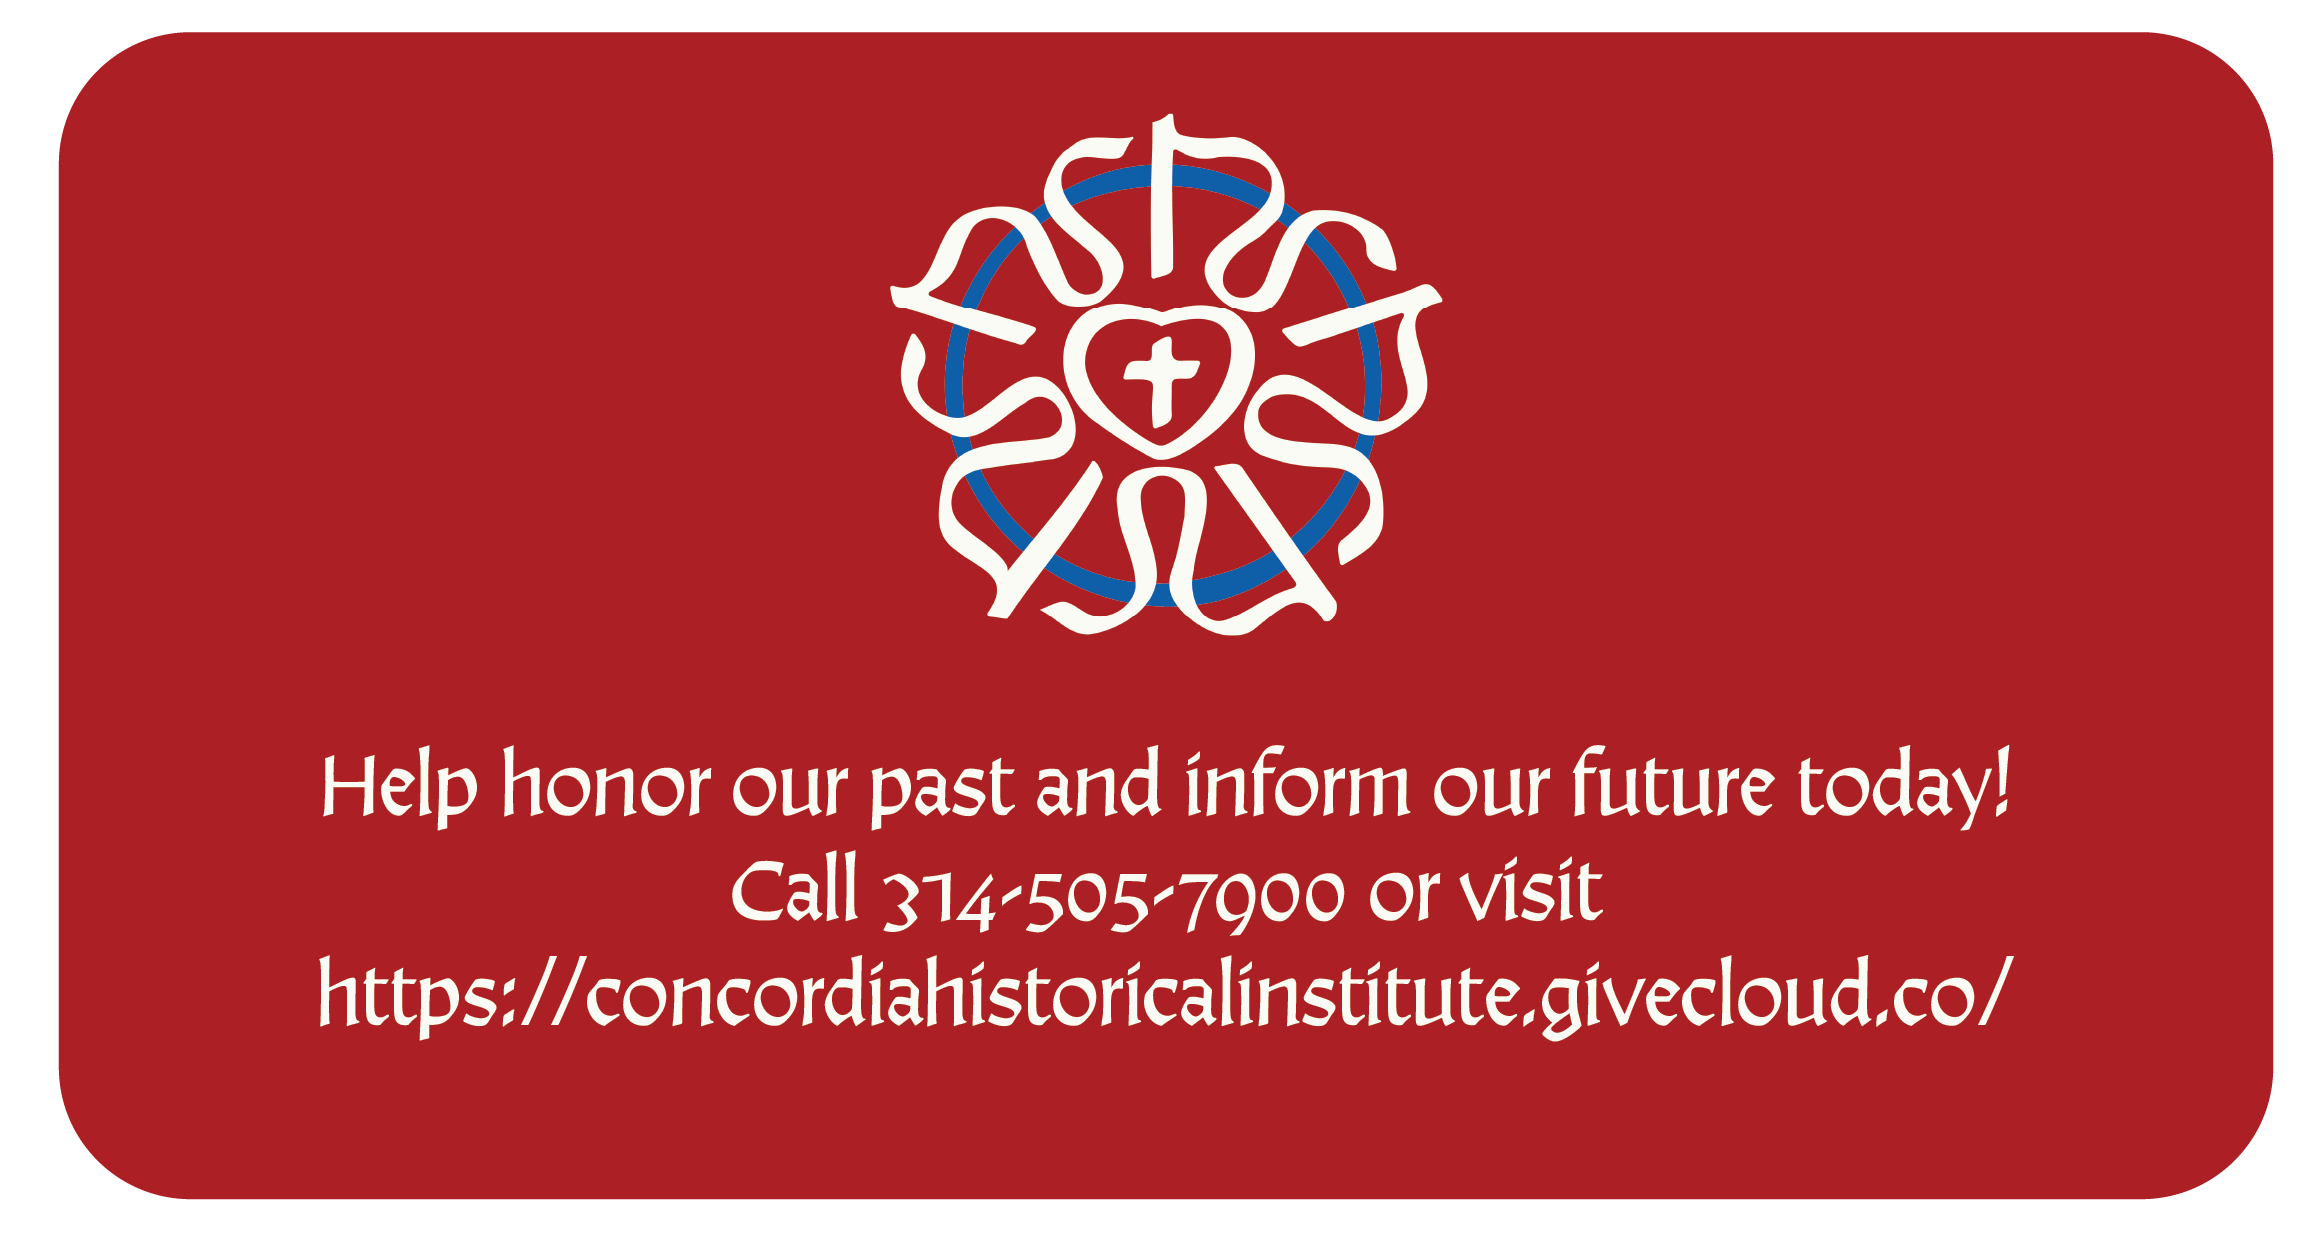 Help honor our past and inform our future today! Call 314-505-7900 or visit https://concordiahistoricalinstitute.givecloud.co